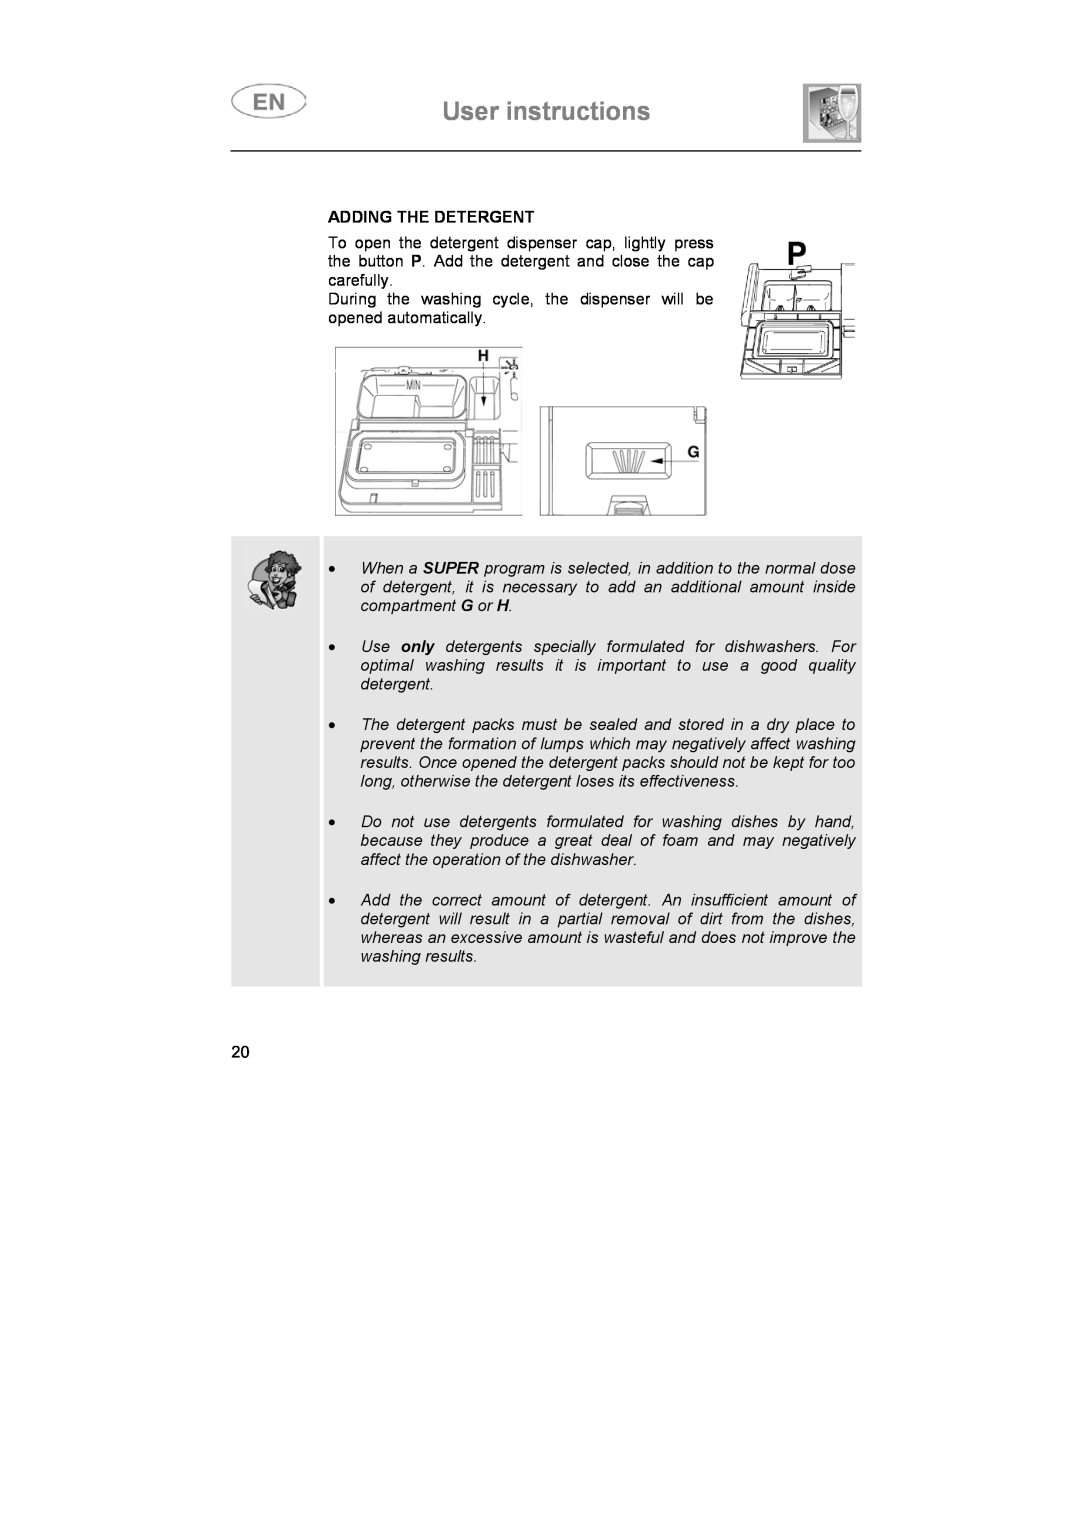 Smeg DF614BE User instructions, Adding The Detergent, During the washing cycle, the dispenser will be opened automatically 